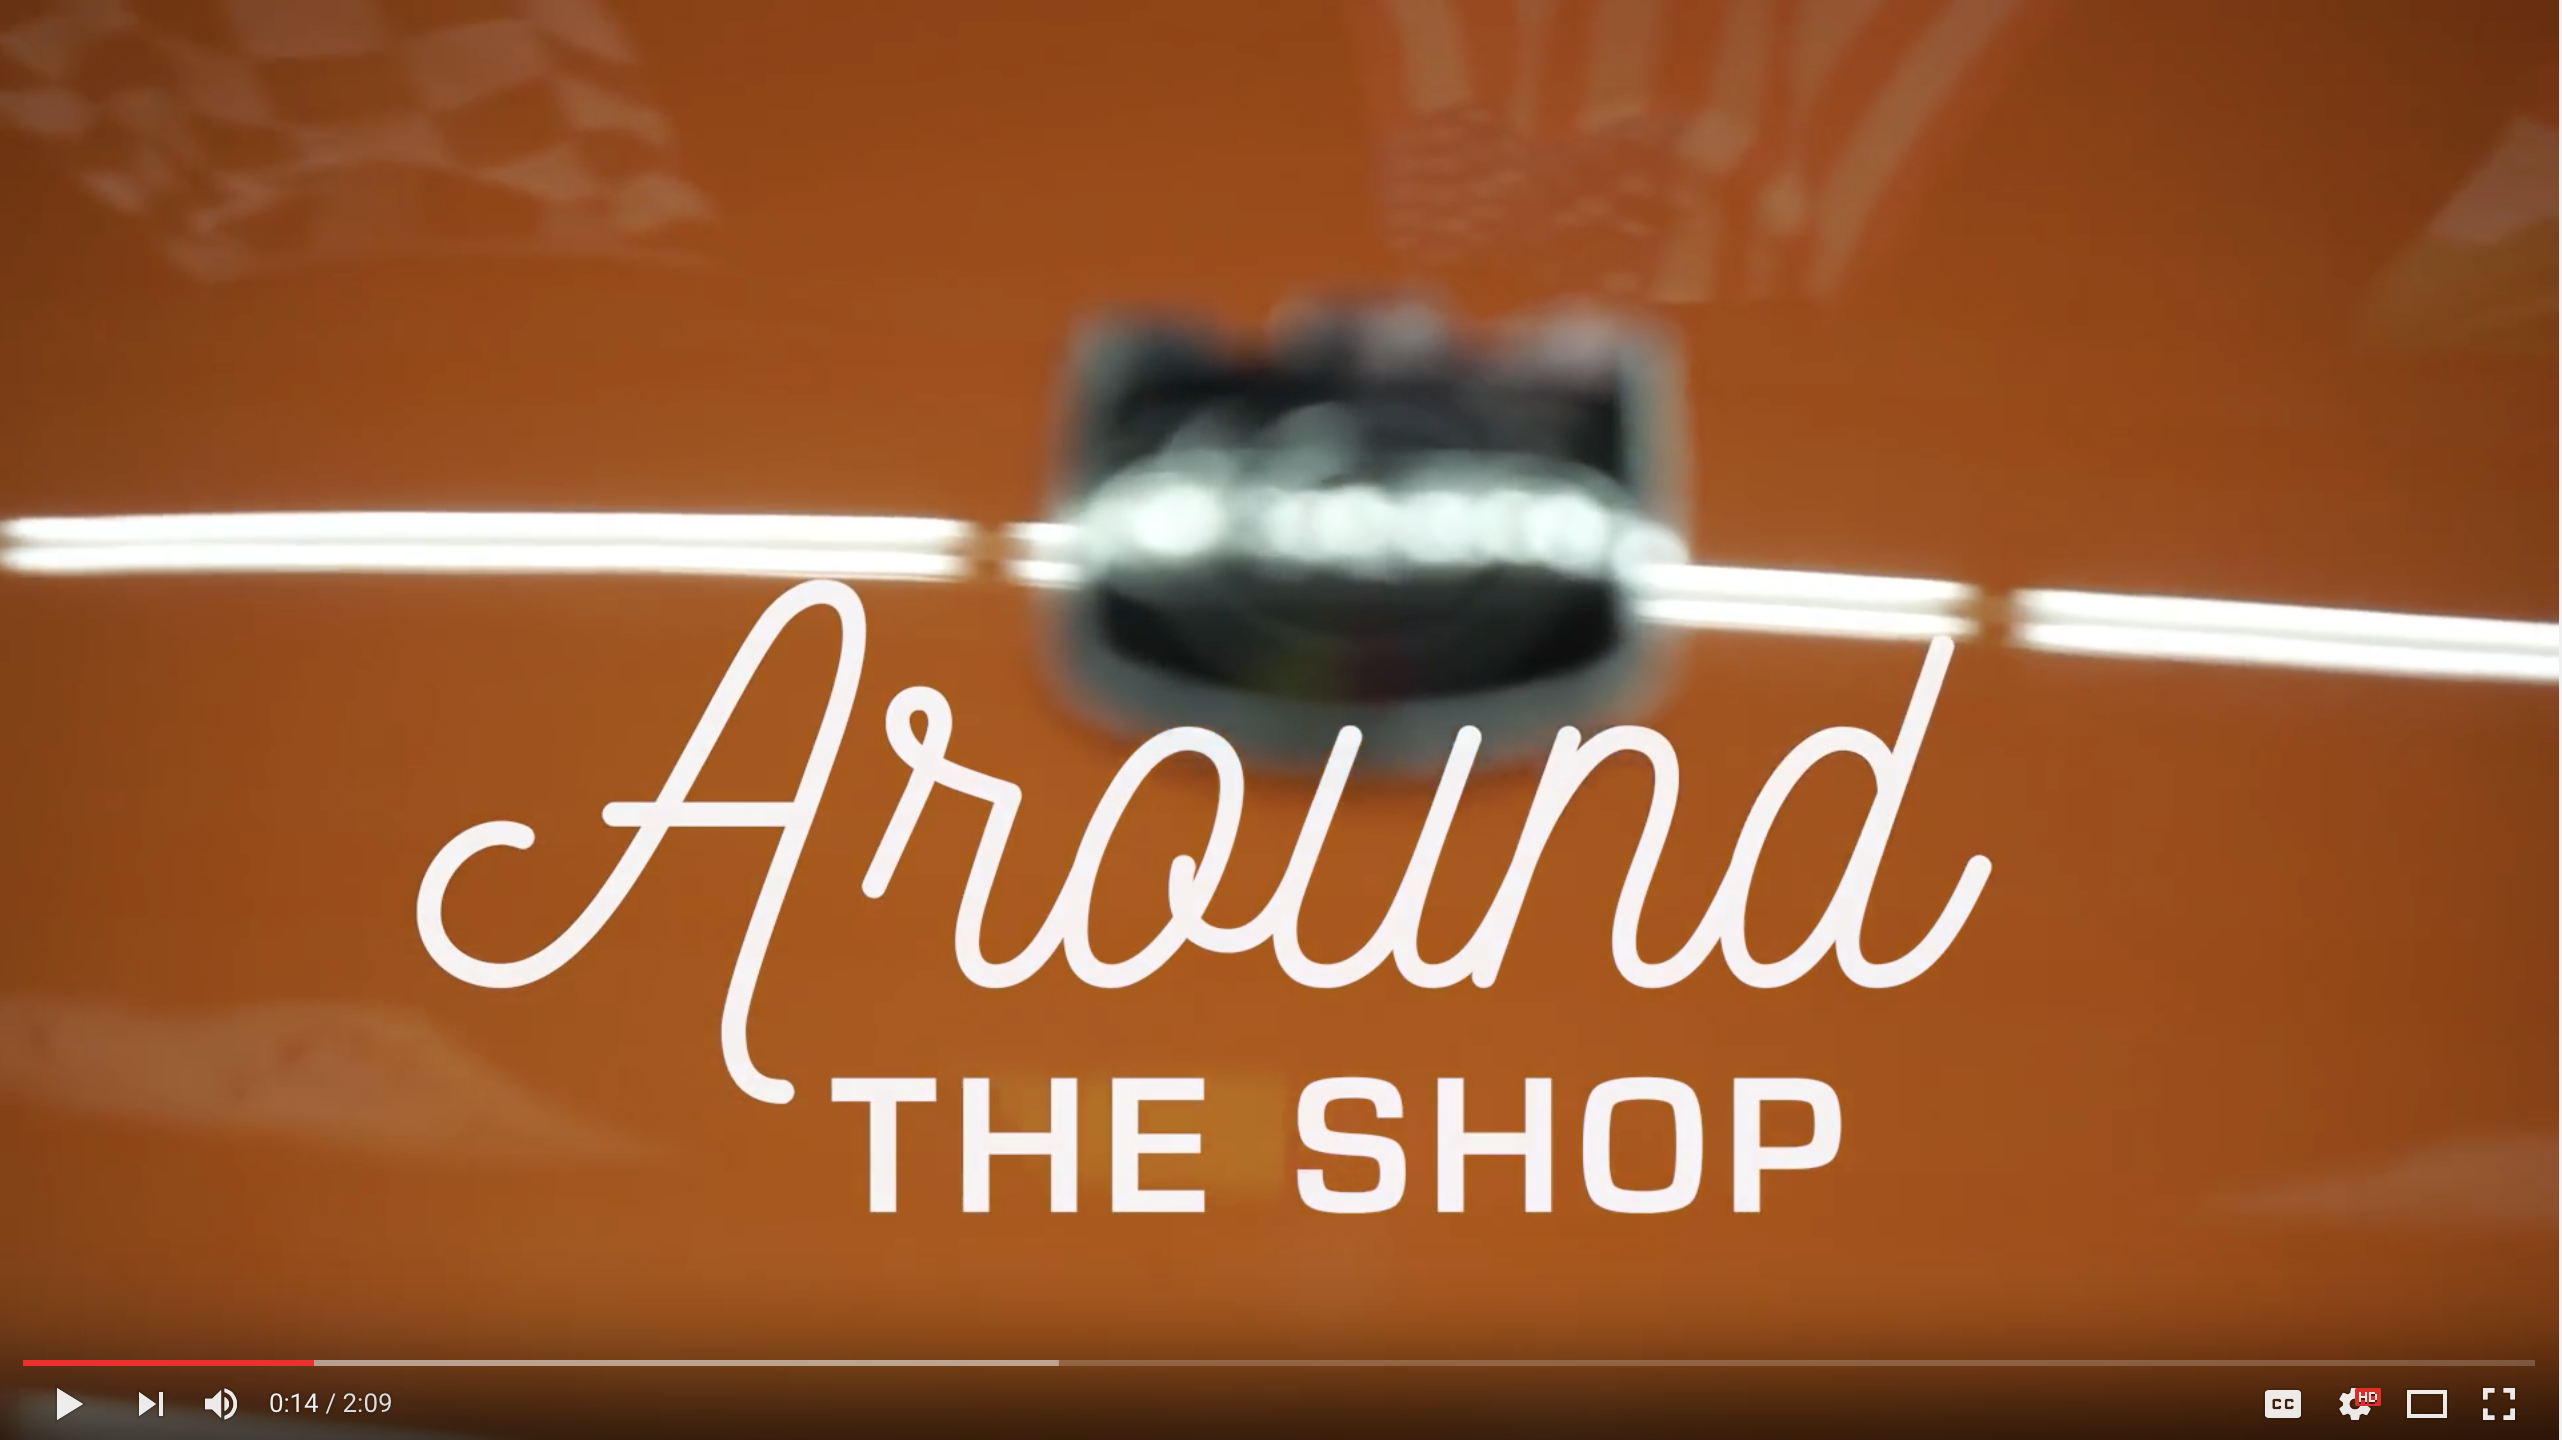 Our Latest Around the Shop Video